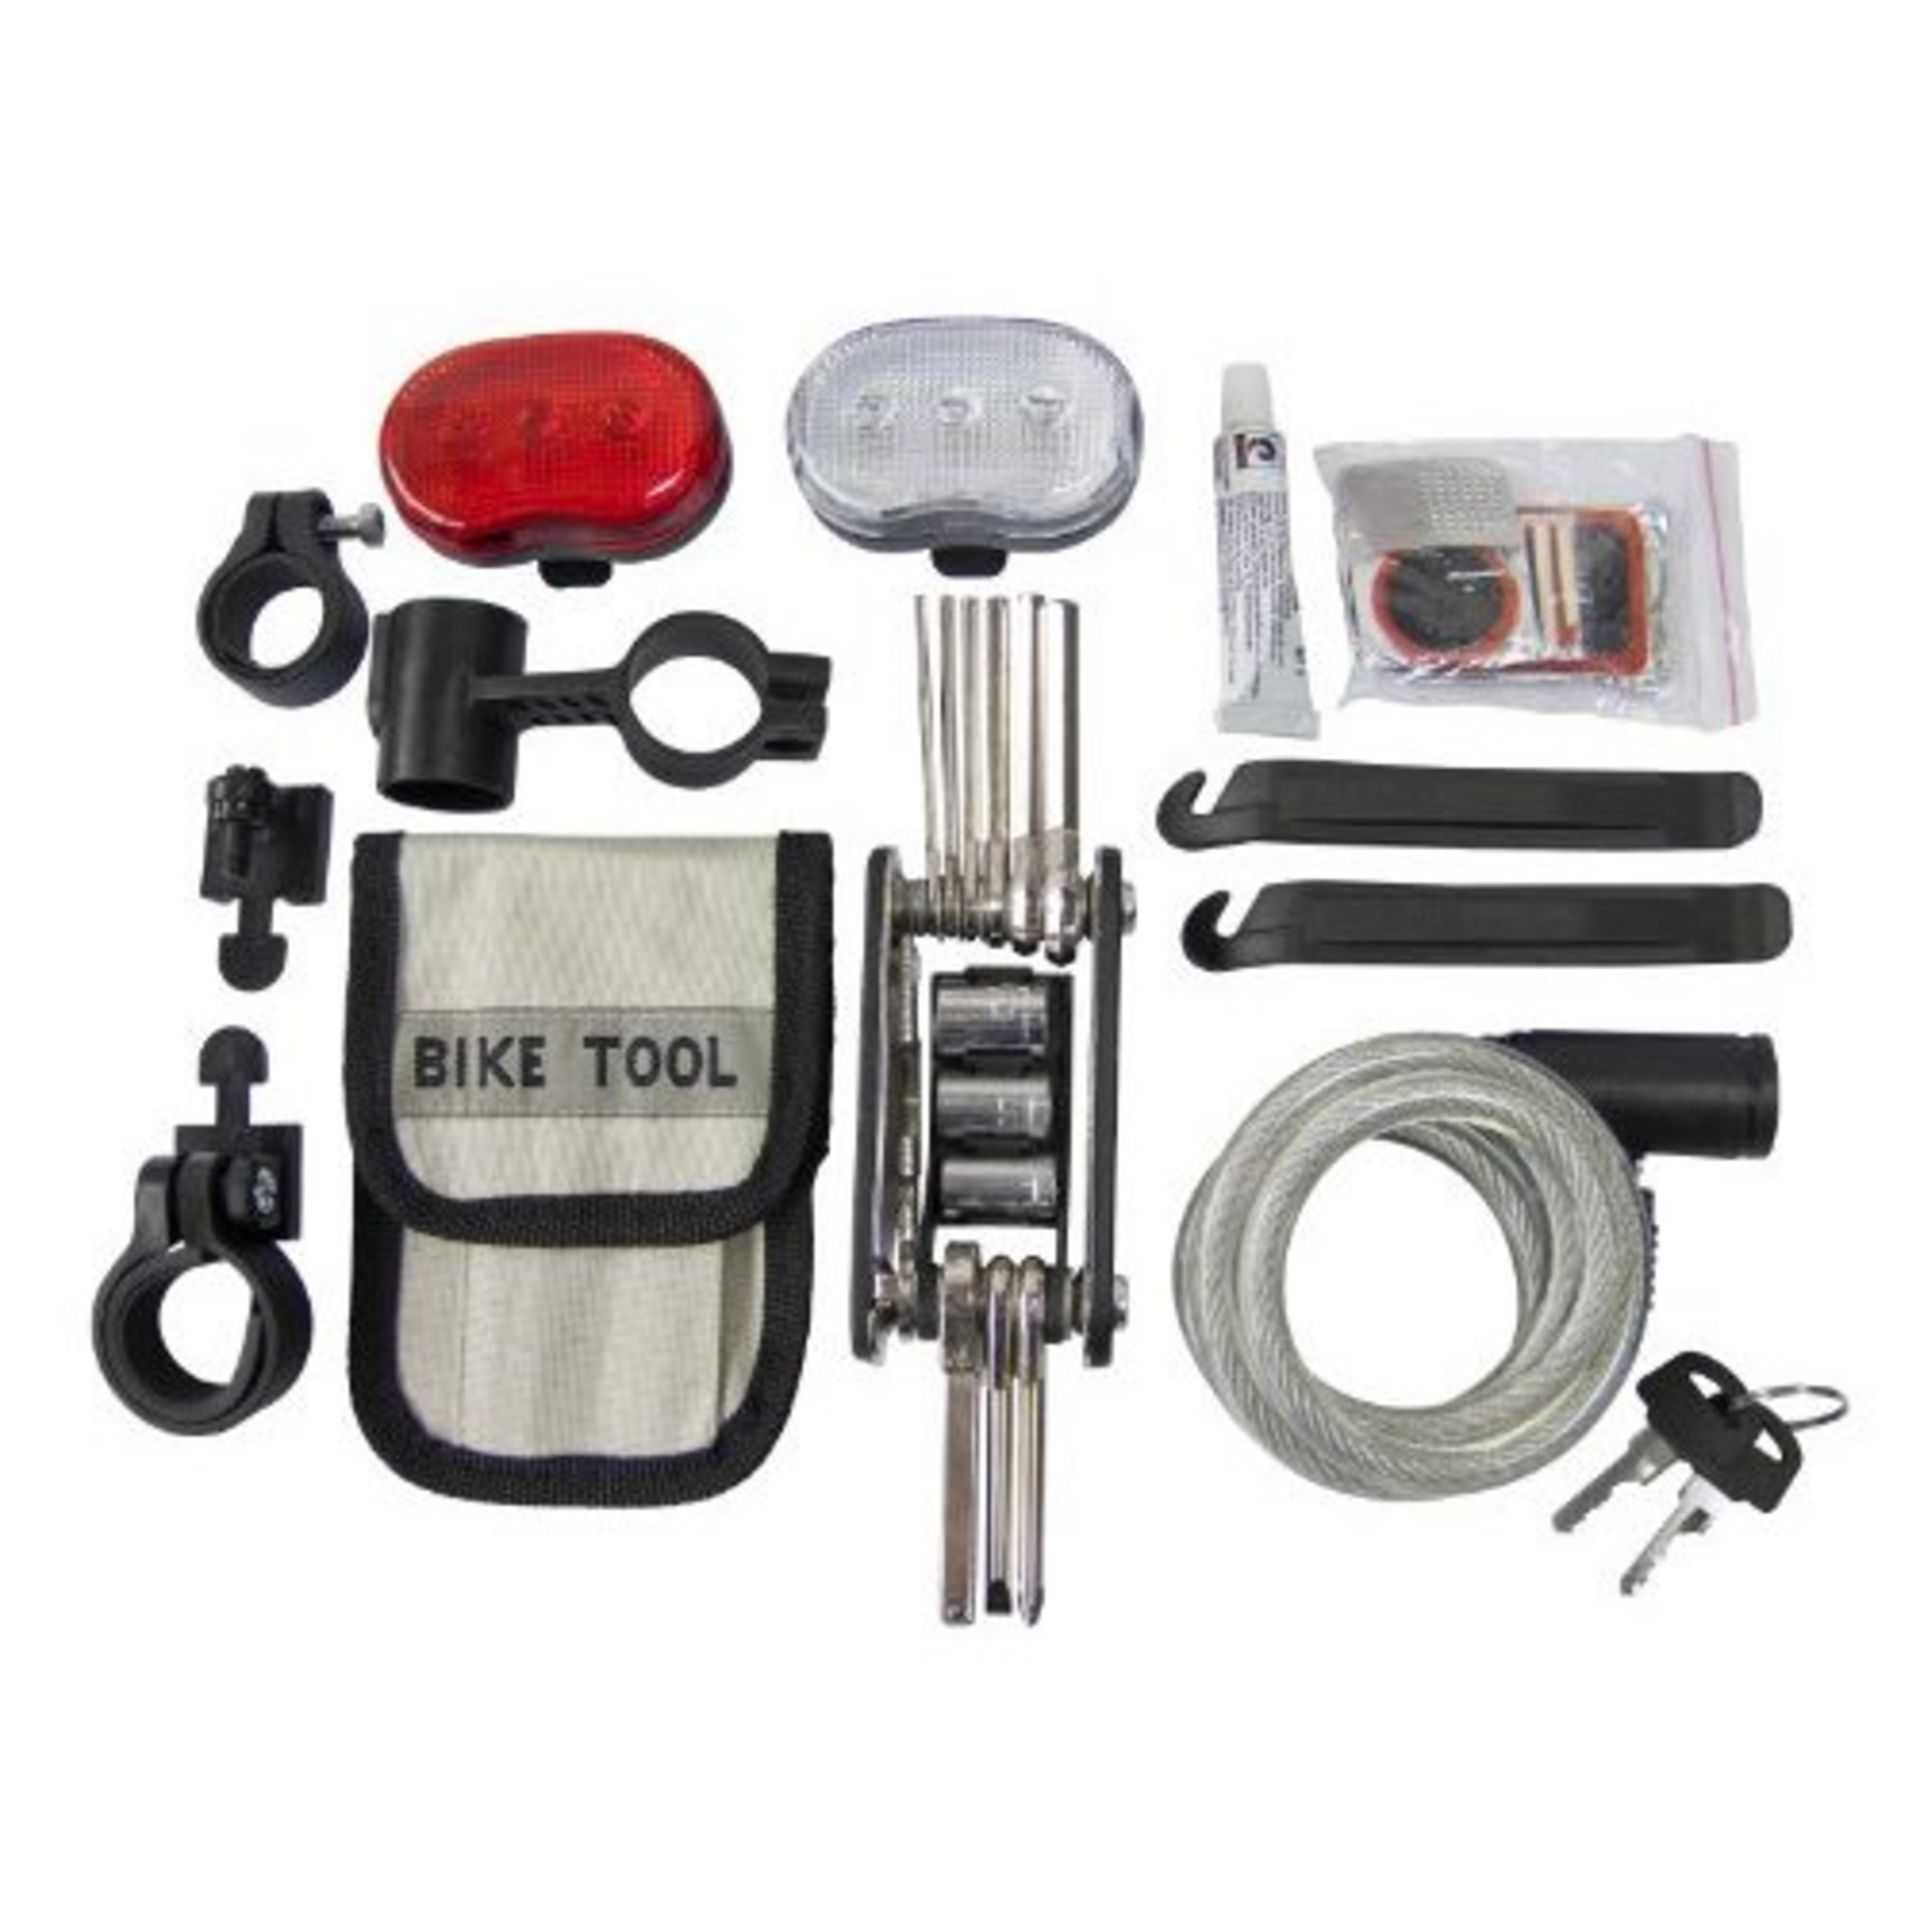 V  Grade A Bicycle Accessory Set Includes Multi Tool - Sockets - Lock - Puncture Kit - Front &